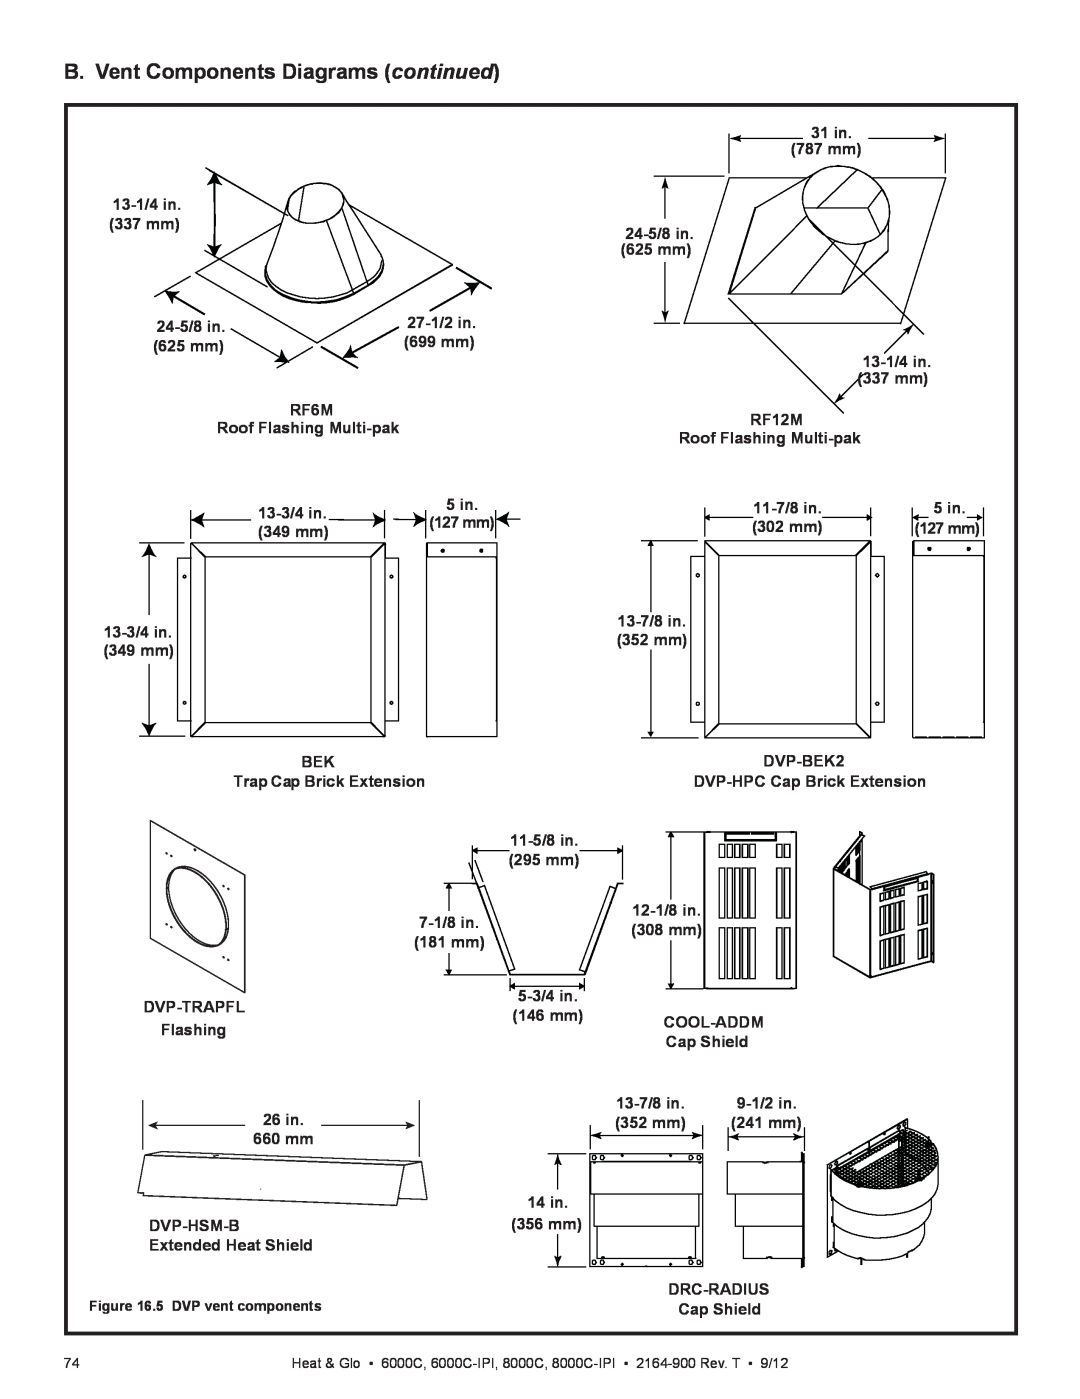 Heat & Glo LifeStyle 6000C manual B. Vent Components Diagrams continued, 31 in 